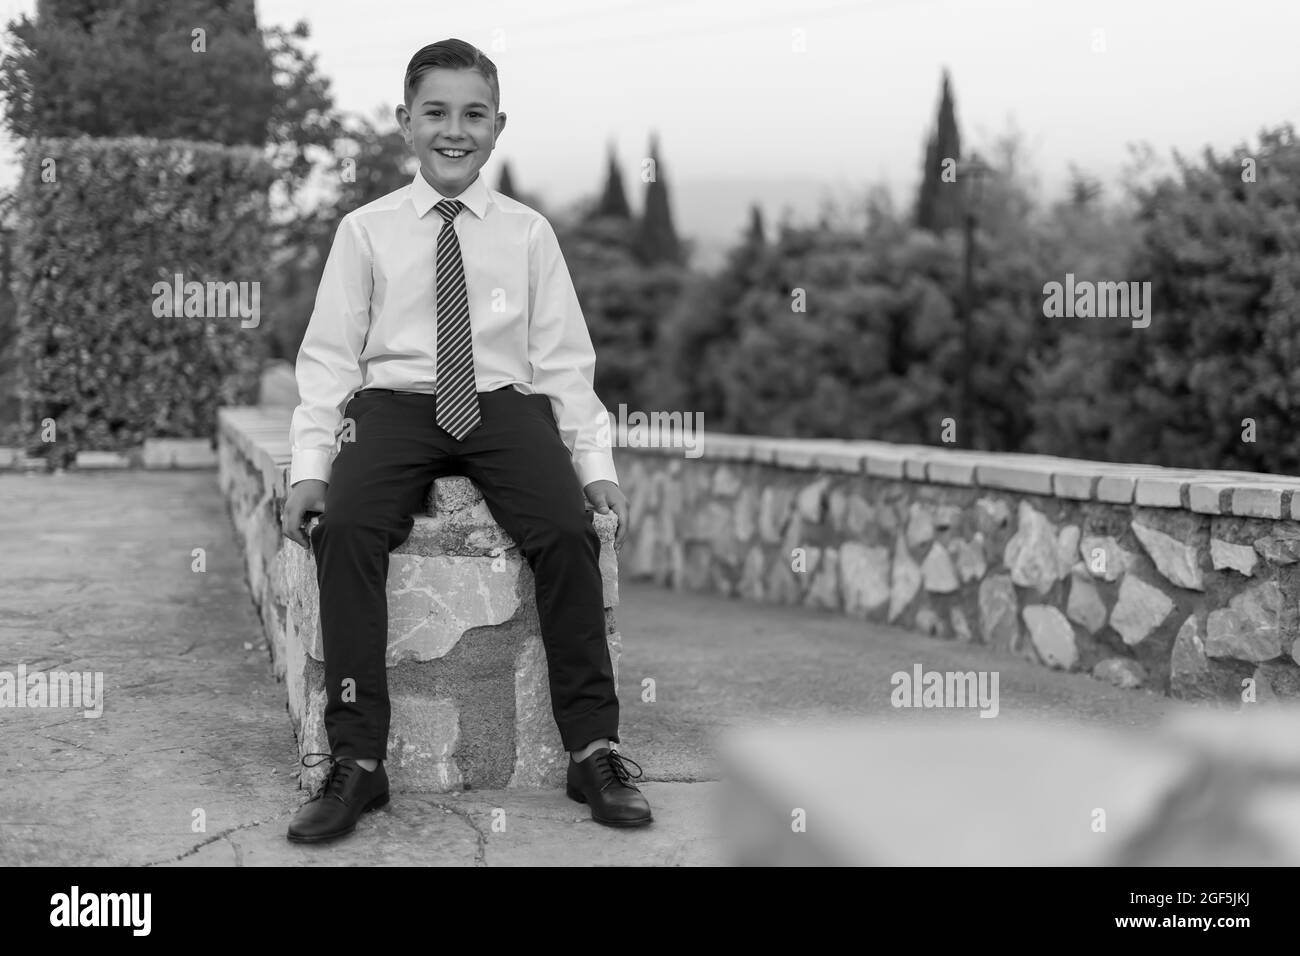 Grayscale shot of an adorable male child in a formal suit outfit posing Stock Photo